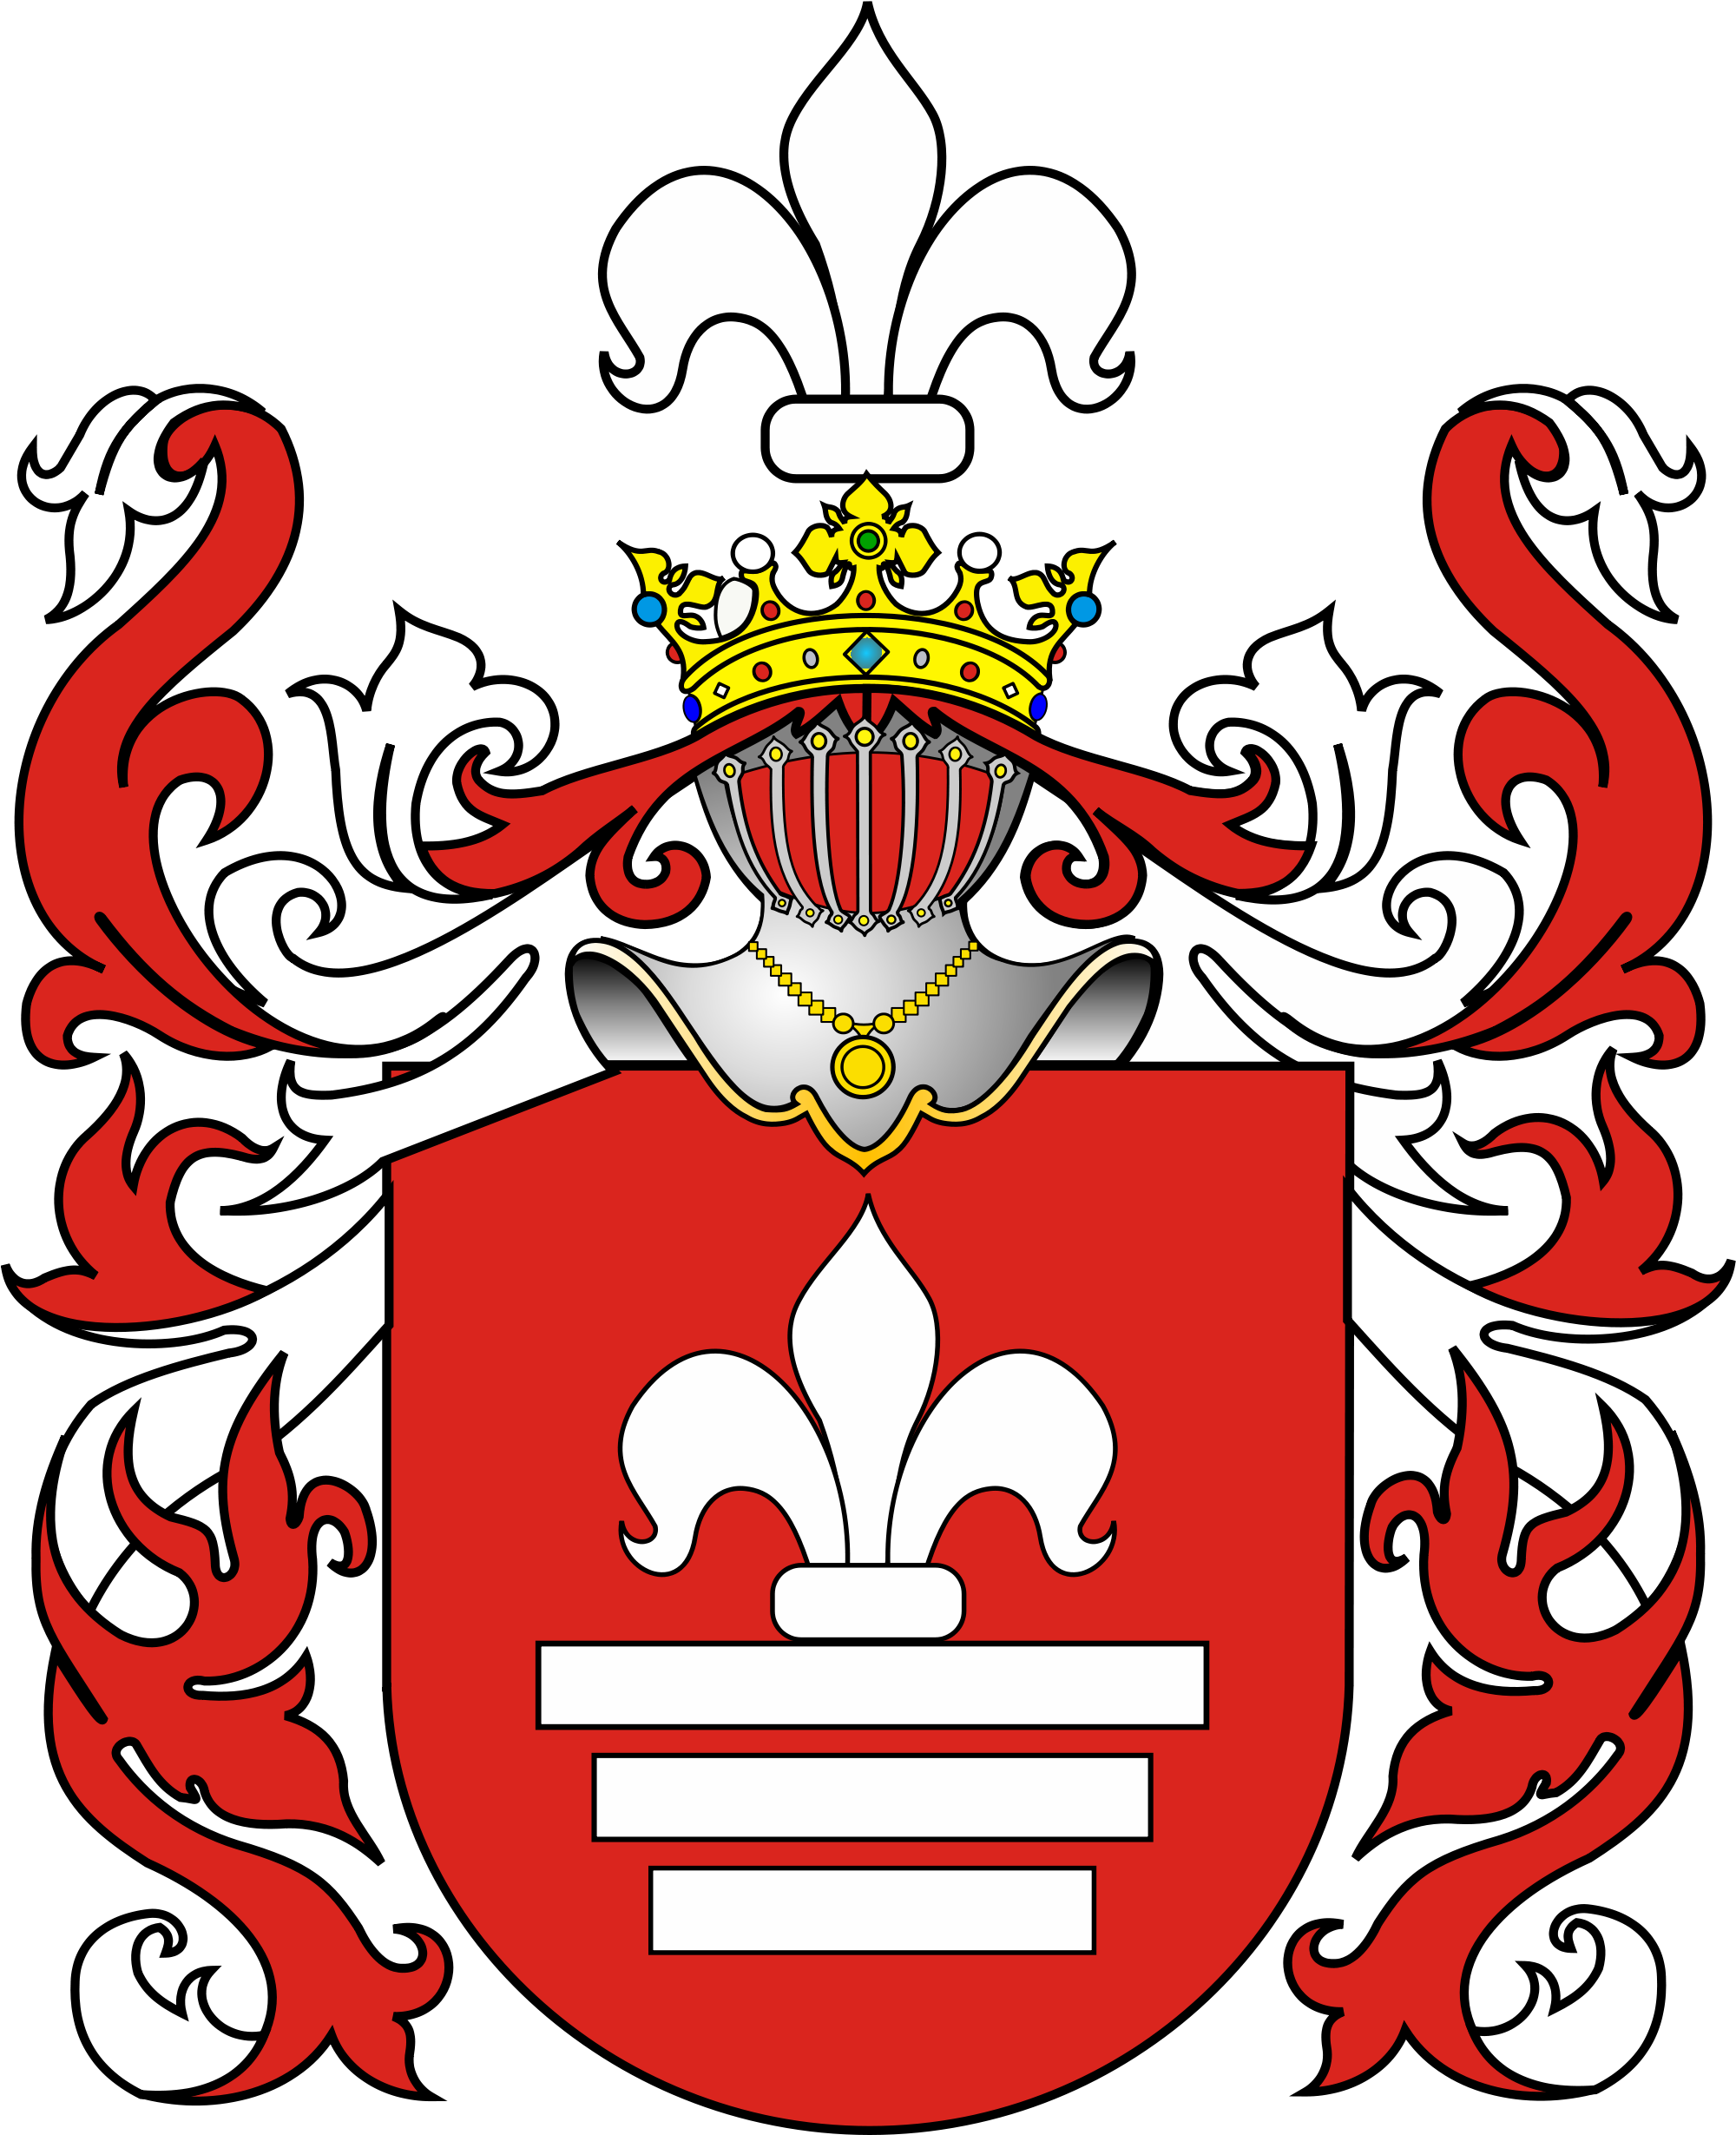 Roch Iii Coat Of Arms - Coat Of Arms Real Examples (2000x2589)